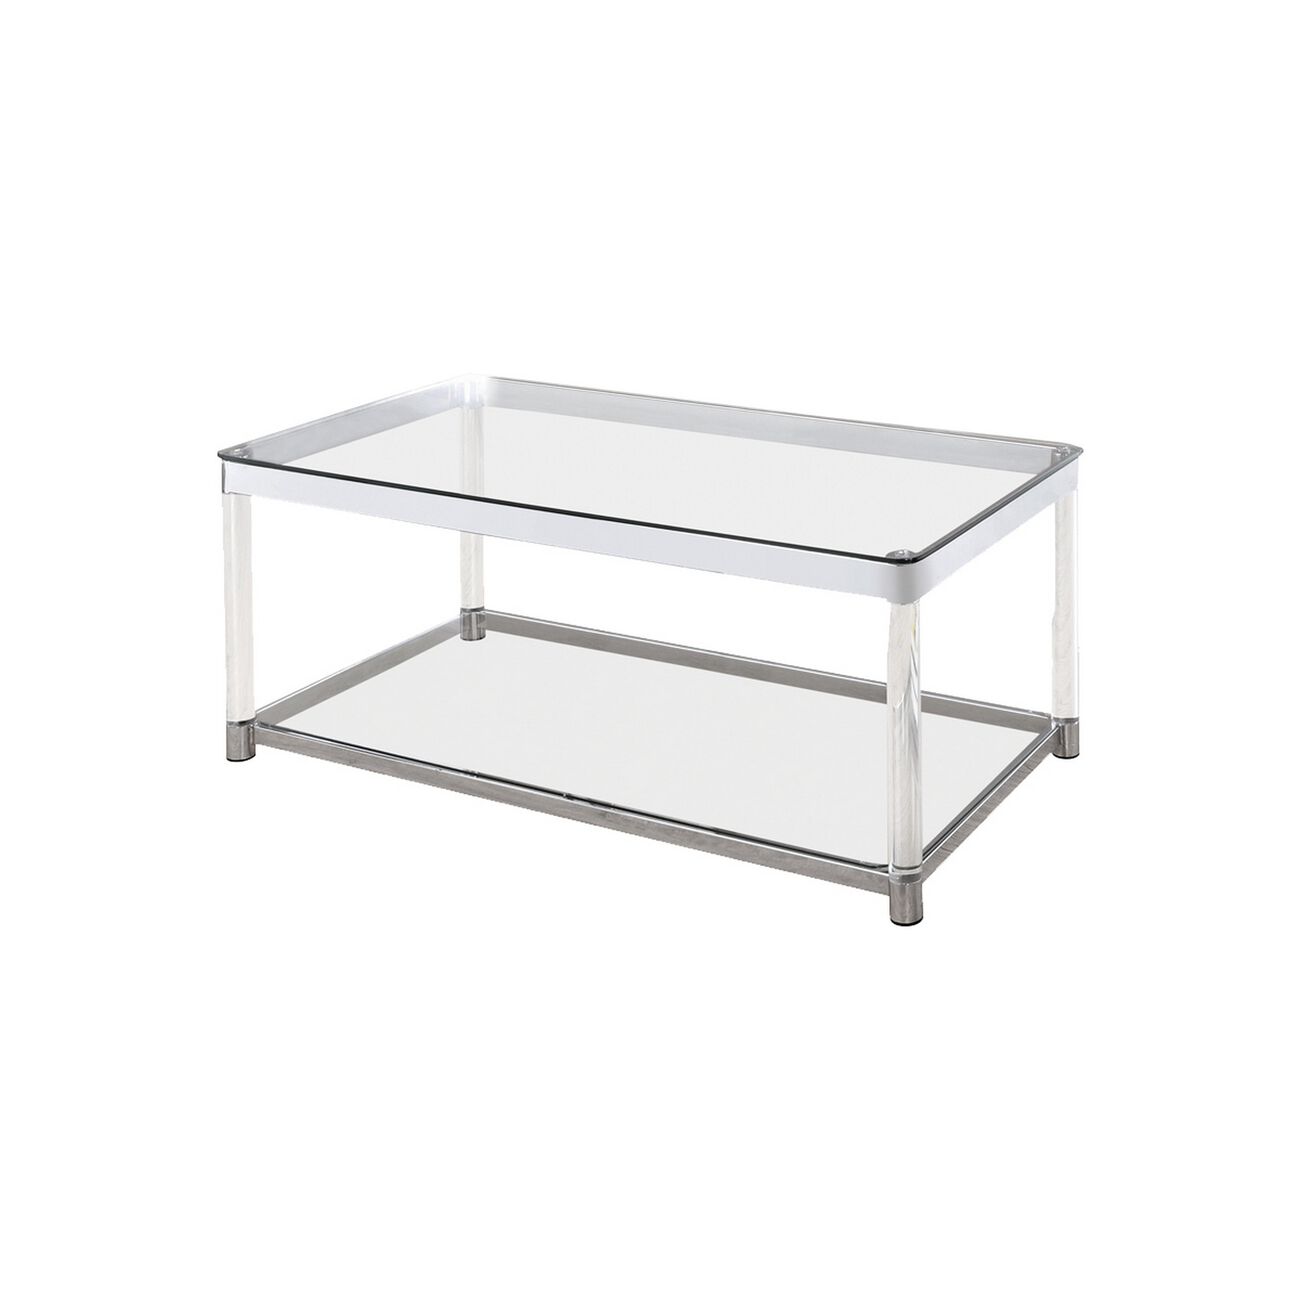 Acrylic Frame Coffee Table with Glass Top and Bottom Shelf,Clear and Chrome